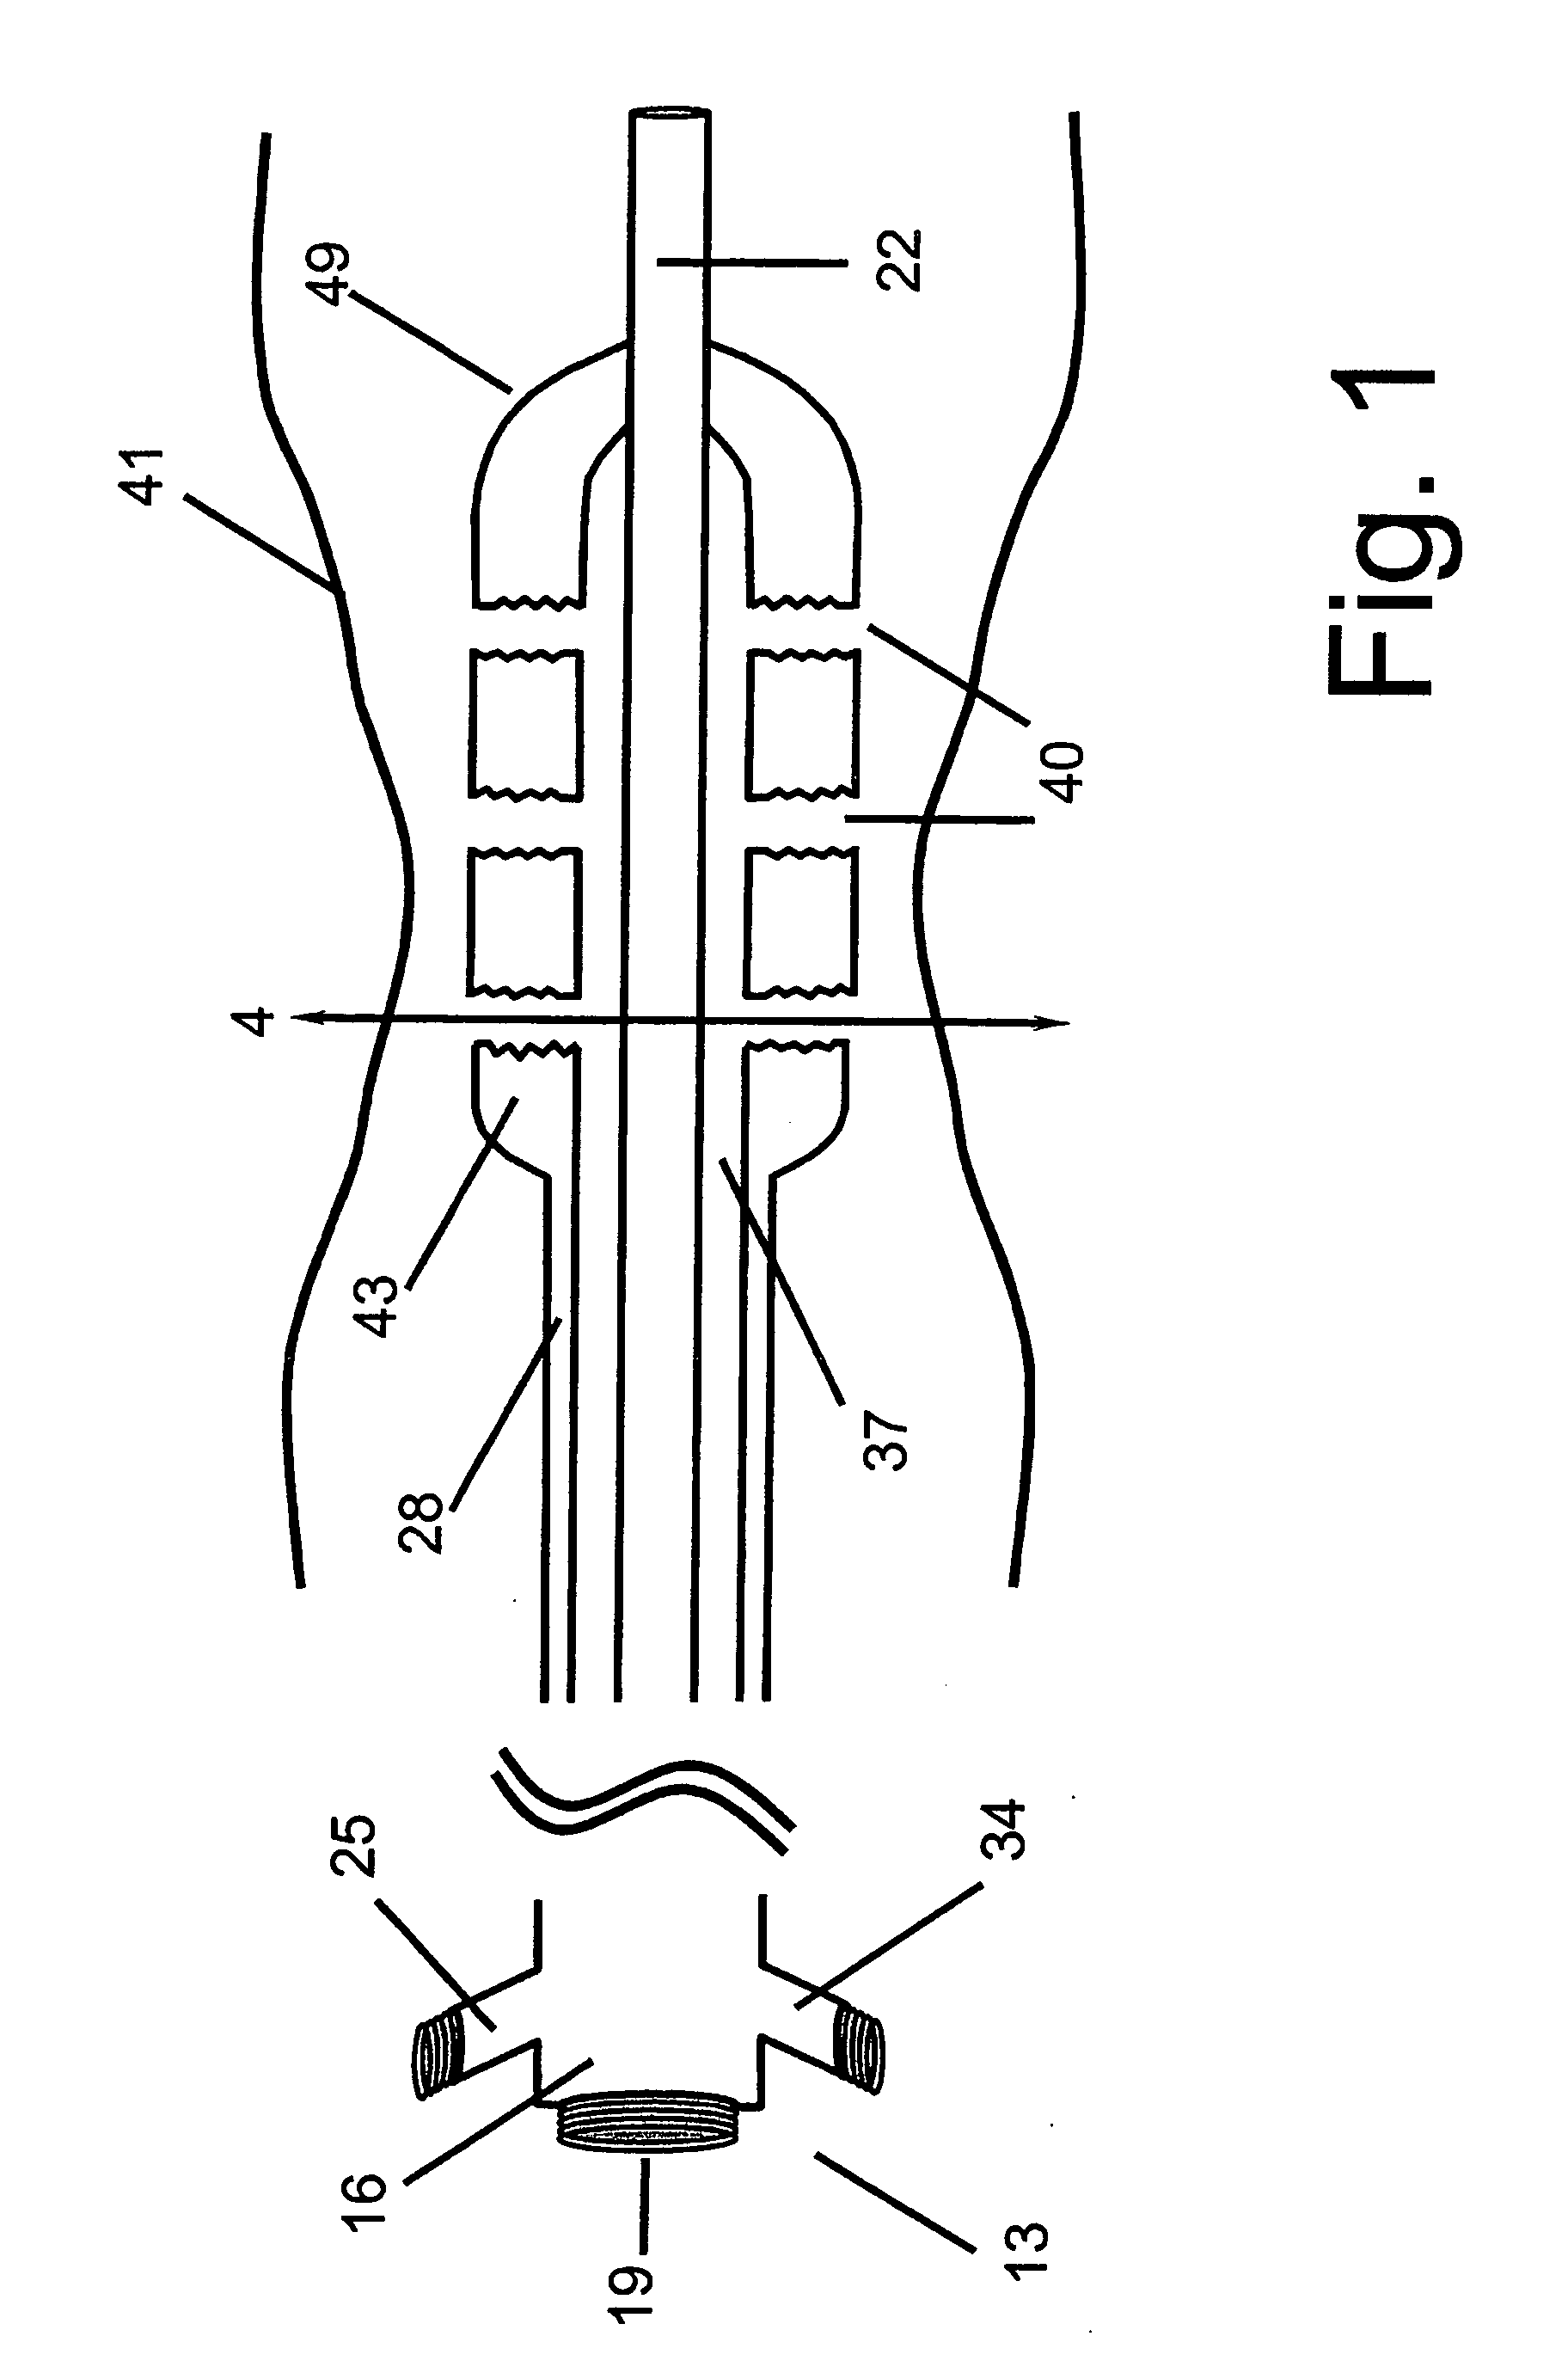 Angioplasty device with embolic recapture mechanism for treatment of occlusive vascular diseases